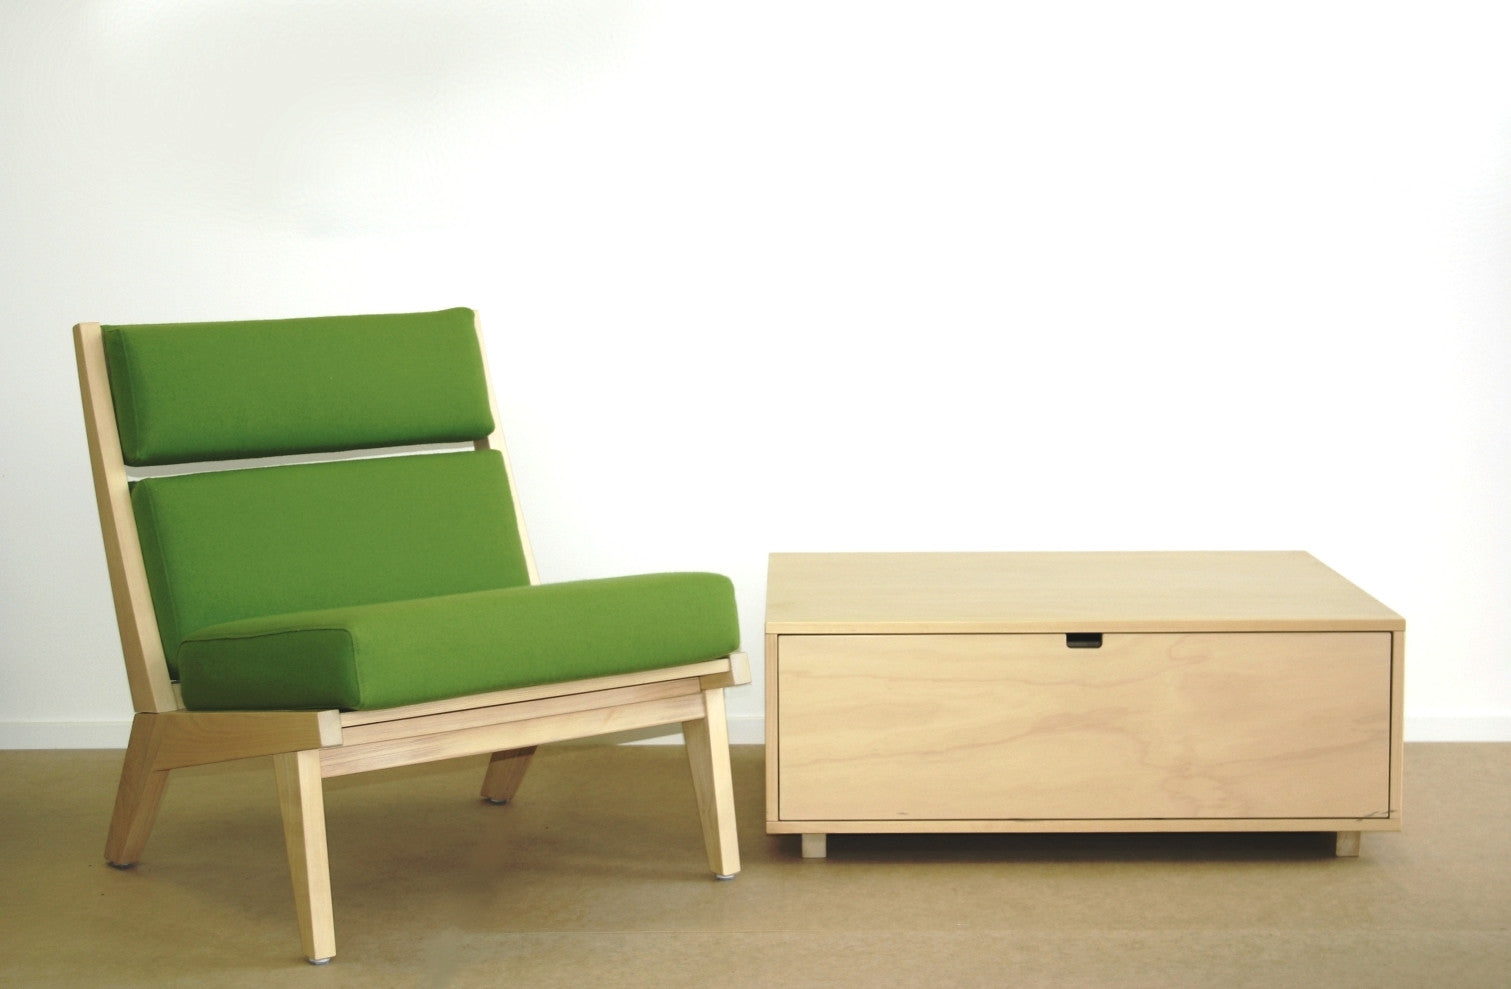 trans-form-it lounge chair with coffee table